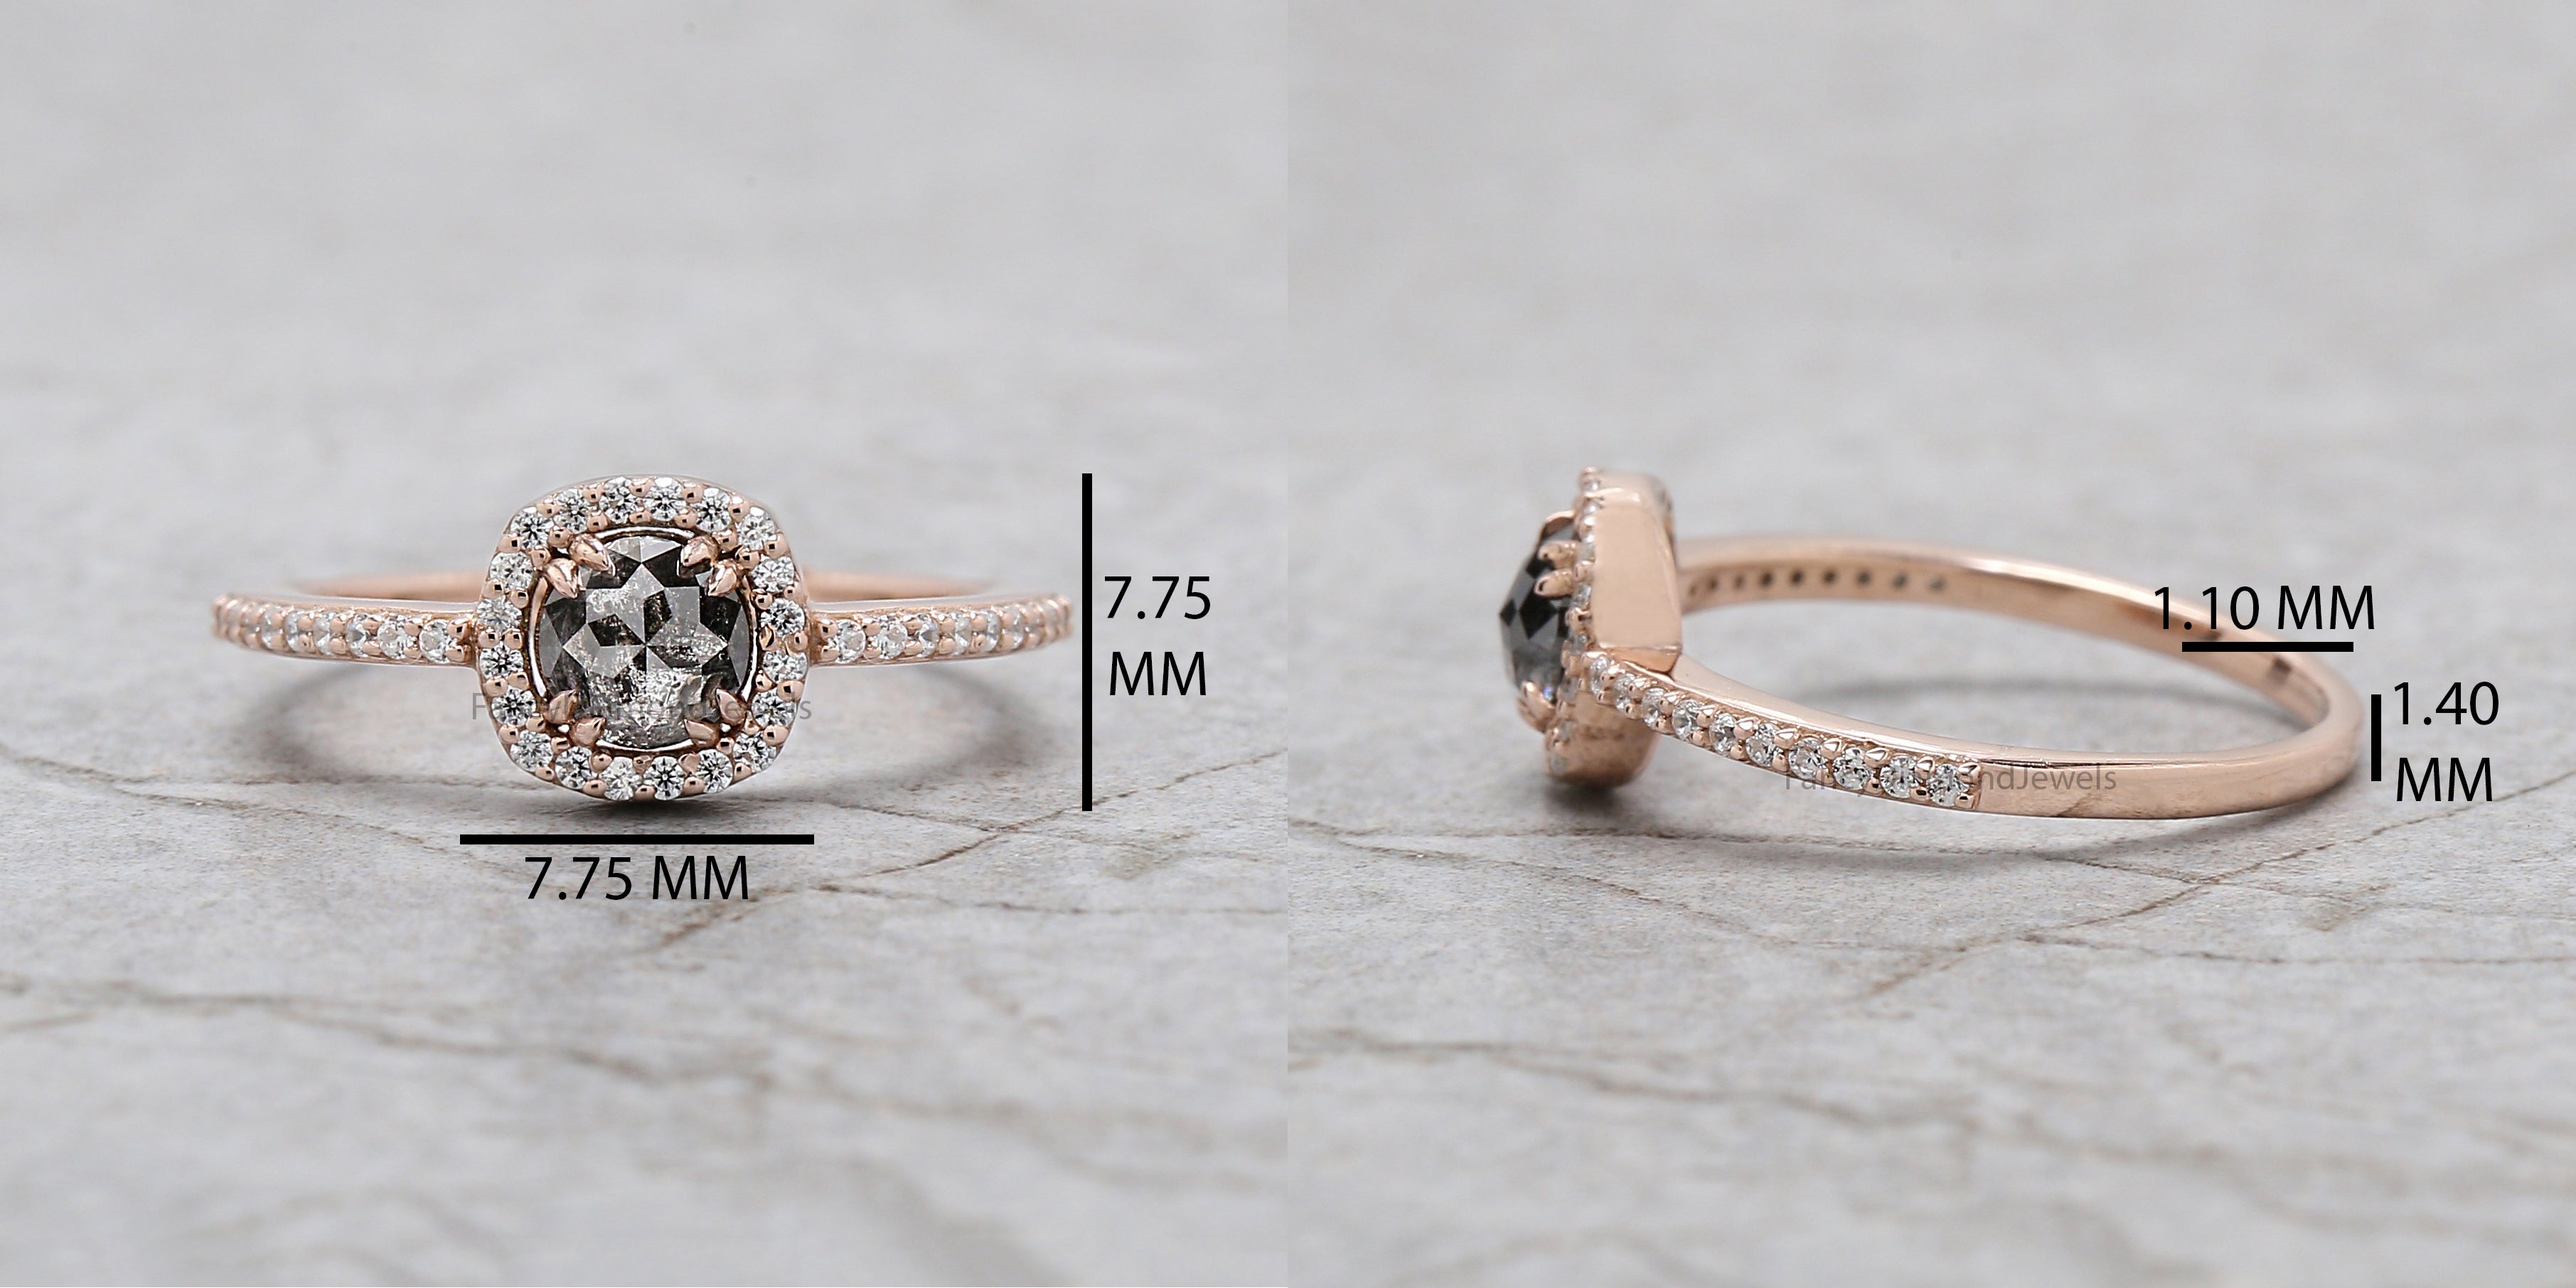 Round Rose Cut Salt And Pepper Diamond Ring 0.51 Ct 4.83 MM Round Diamond Ring 14K Rose Gold Silver Engagement Ring Gift For Her QL2778